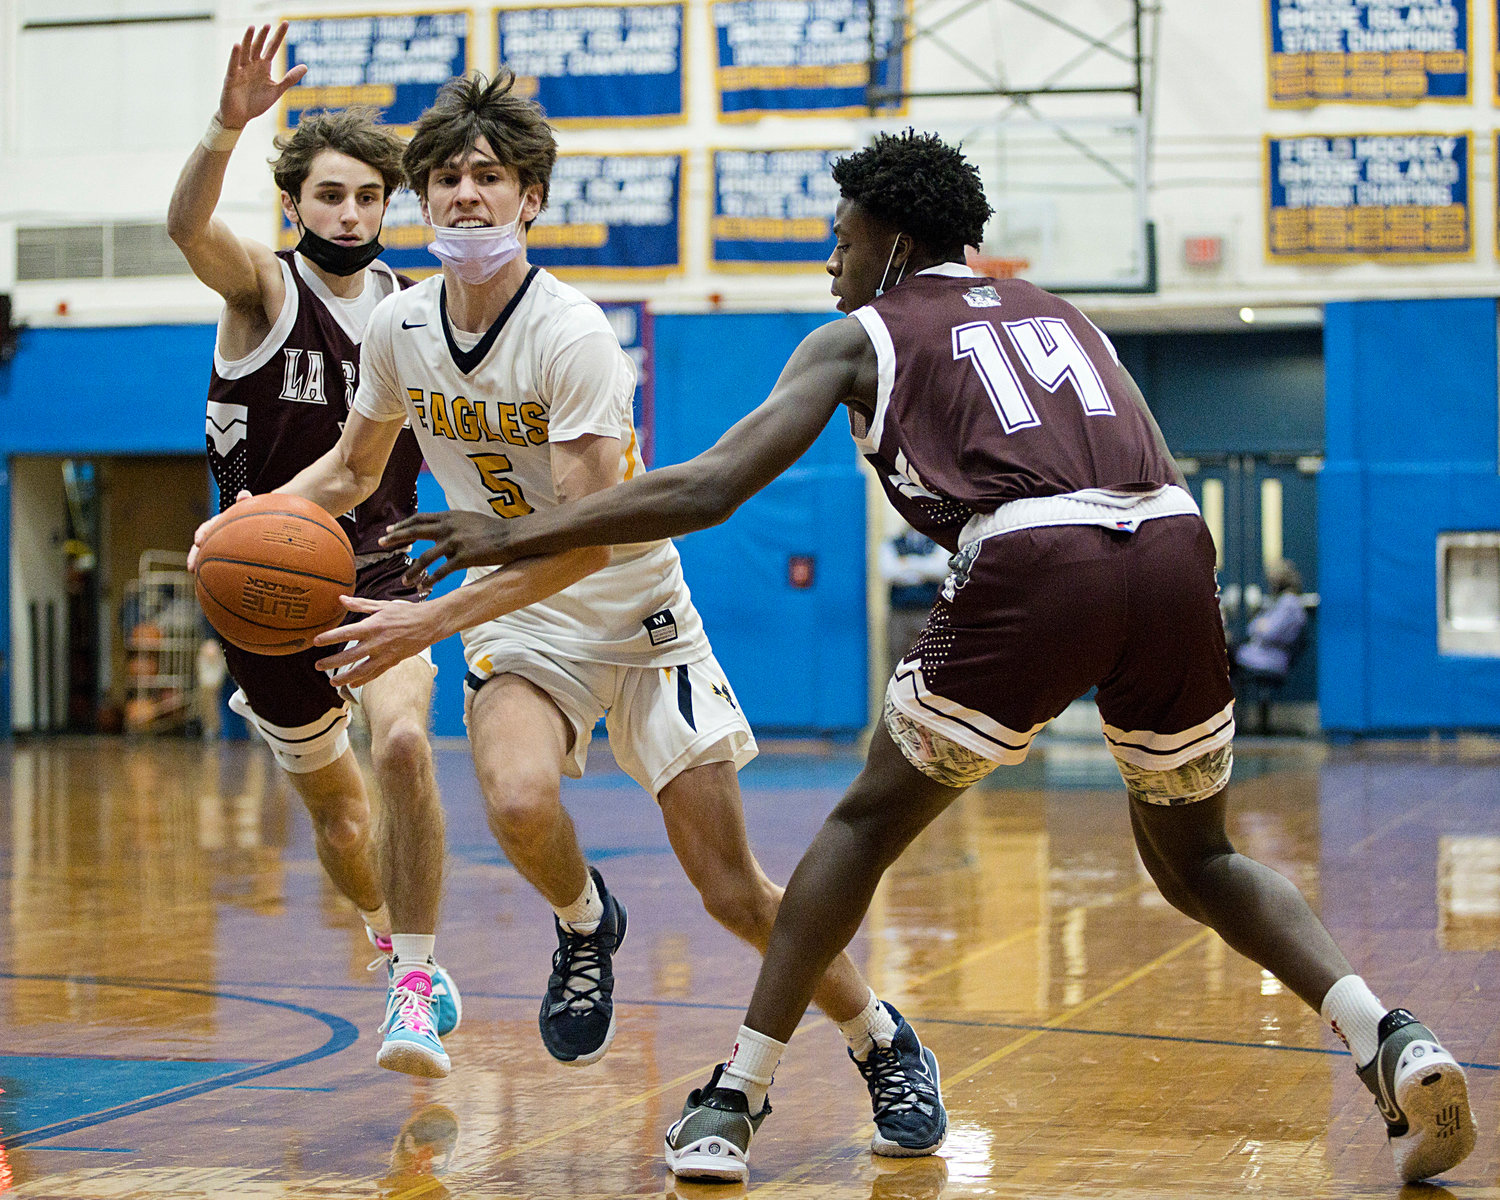 Matt Raffa looks for an opportunity while controlling the ball through a pair of LaSalle defenders.